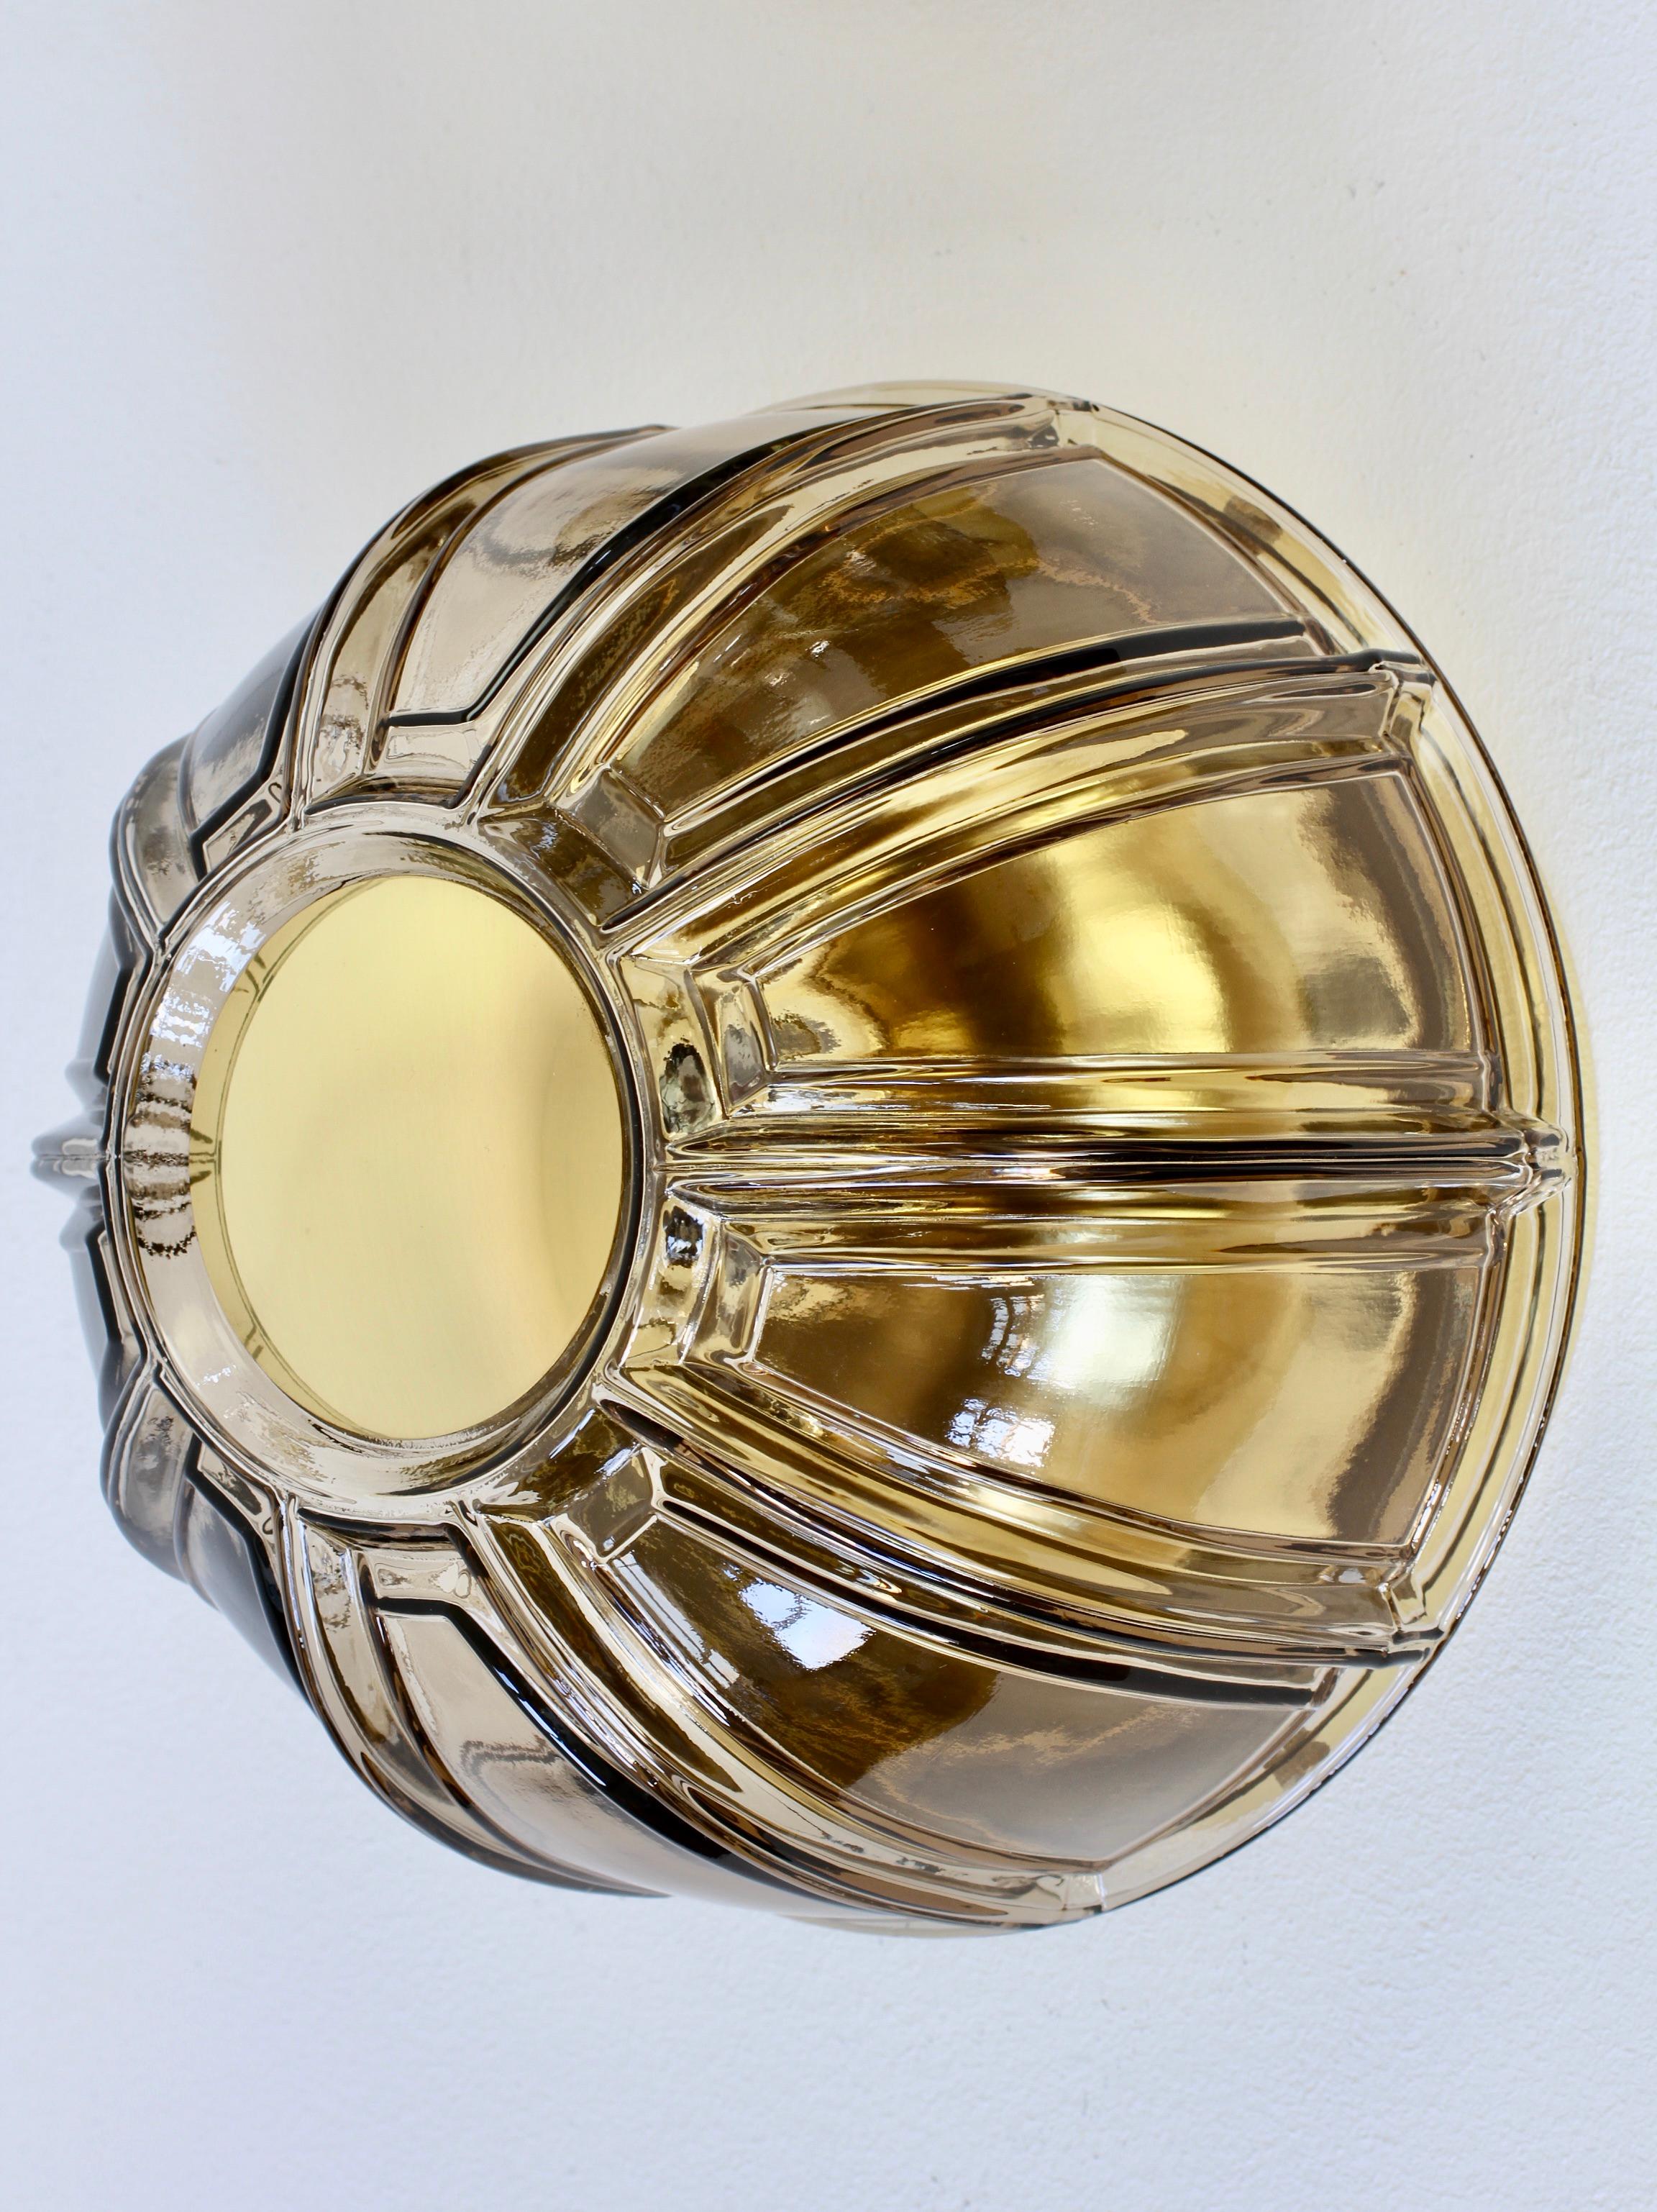 Polished Limburg 1 of 5 Topaz Toned Textured Glass Flush Mount Wall Lights or Sconces For Sale